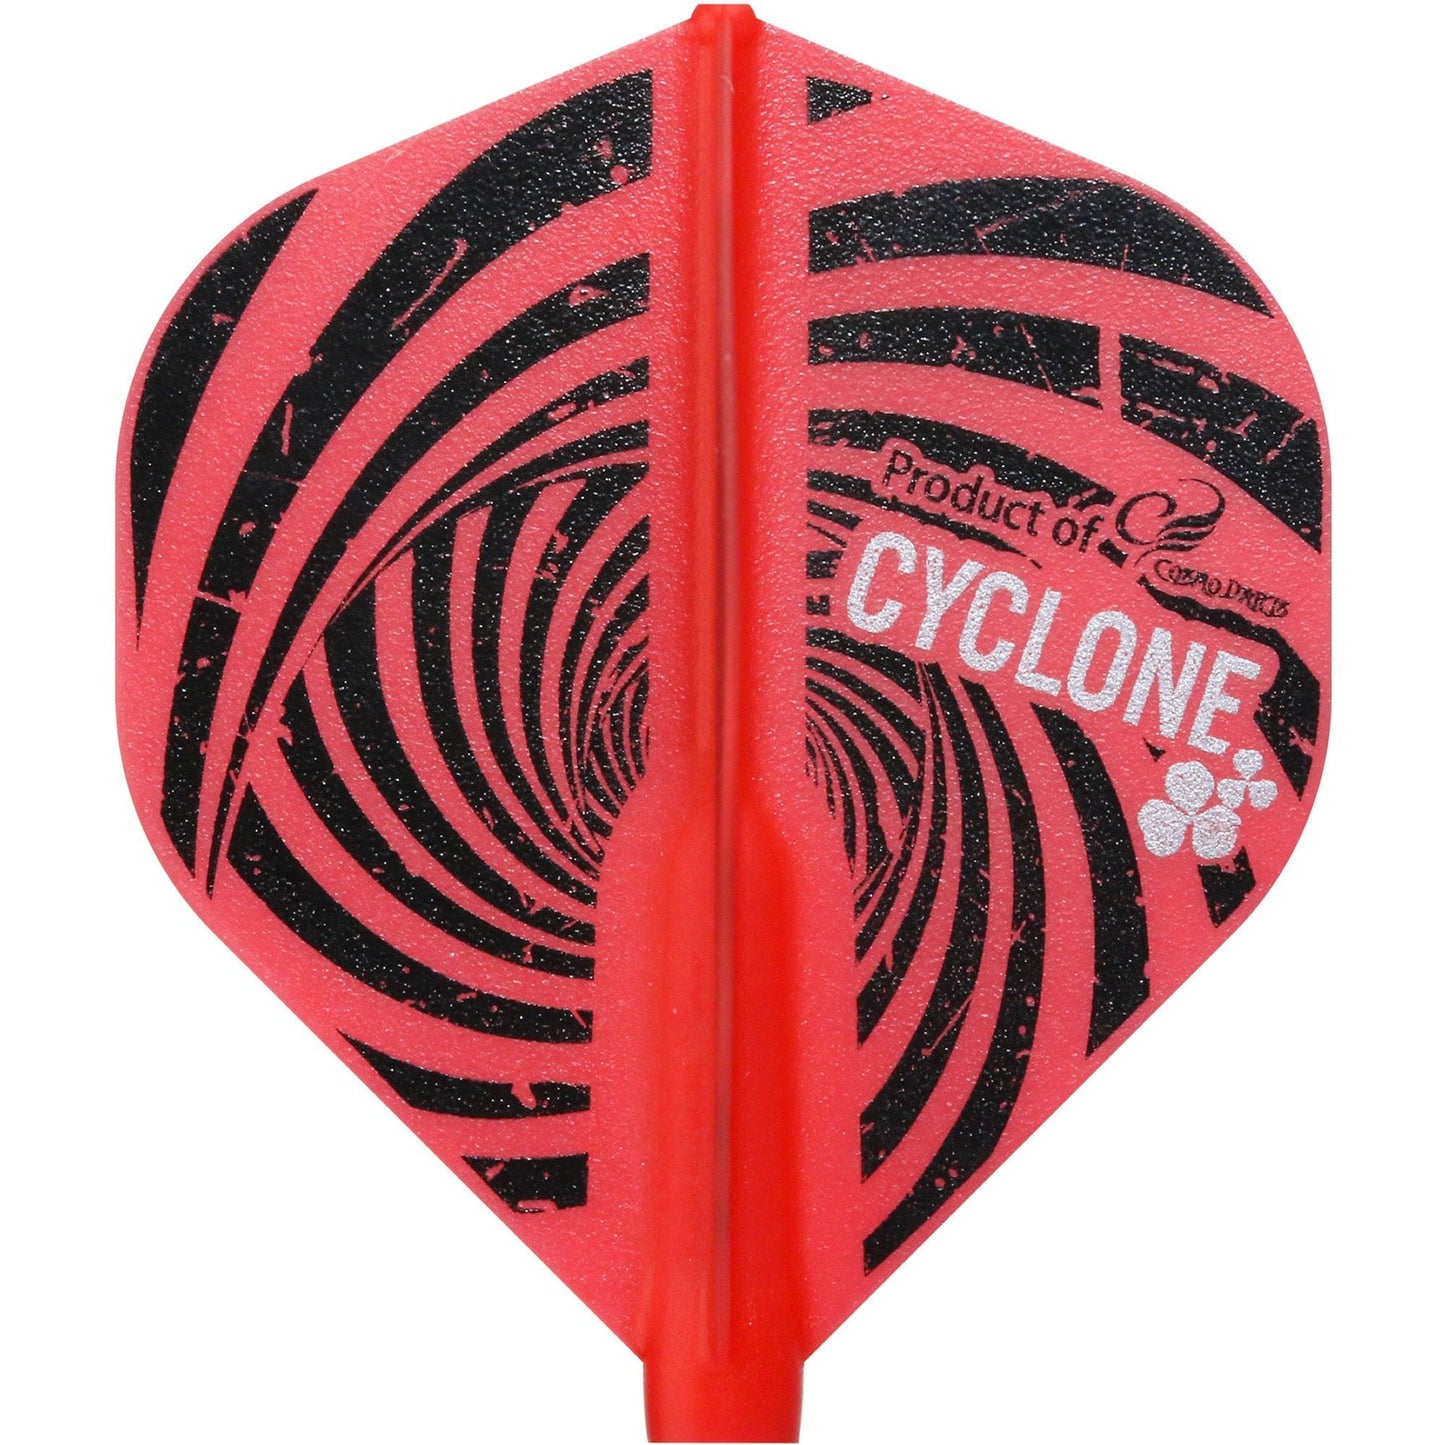 Cosmo Fit Flight - Player - Cyclone - Standard - Red - Micky Mansell 2